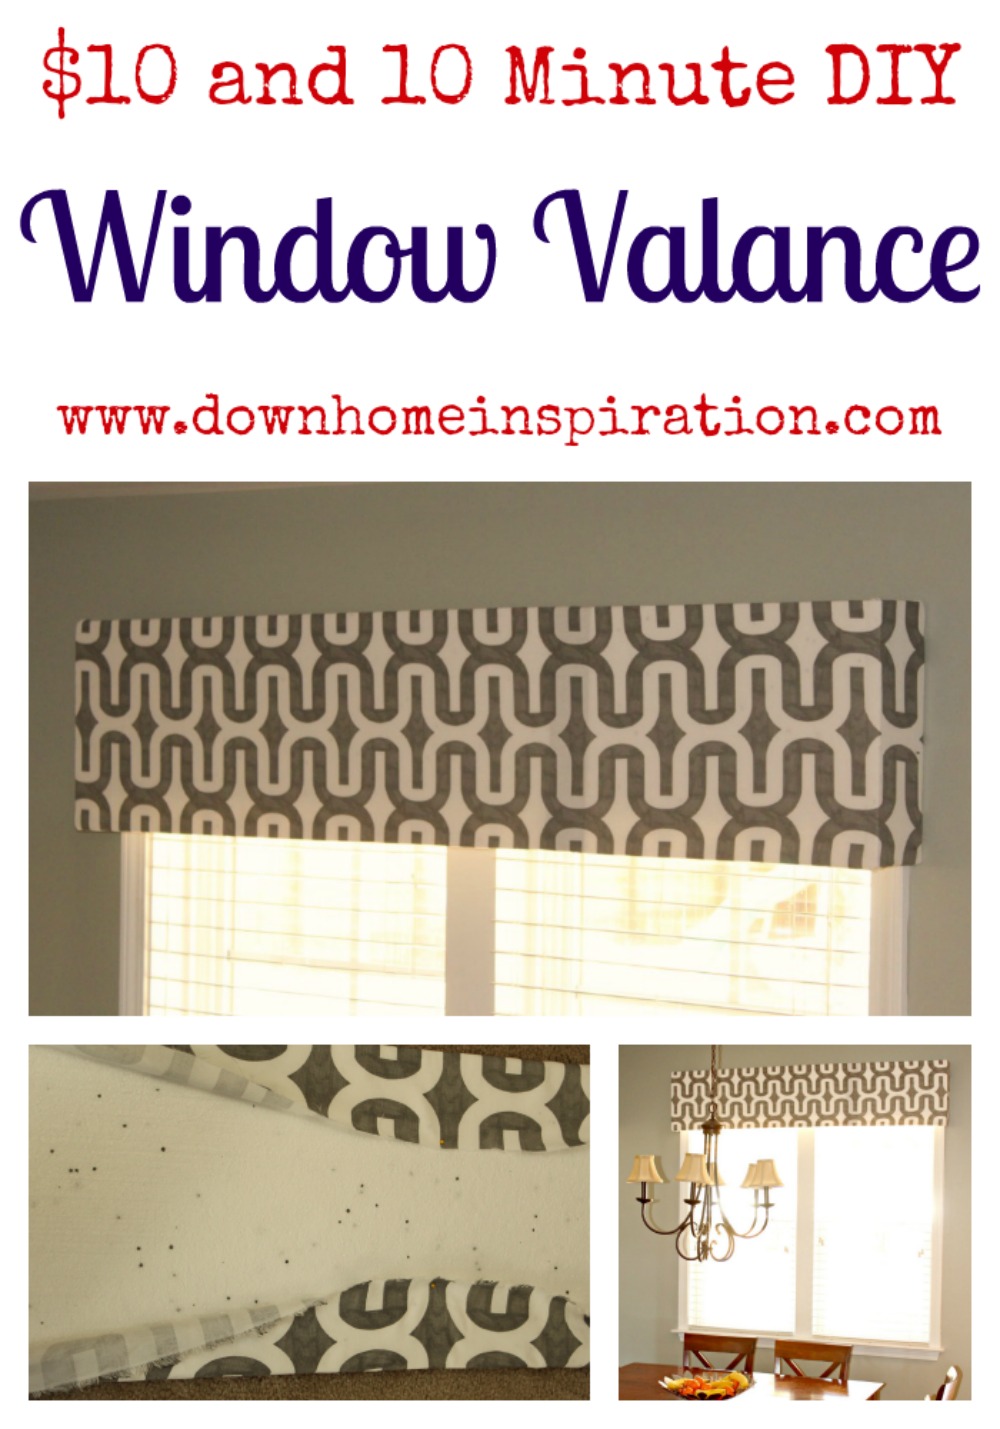 $10 and 10 Minute DIY Window Valance - Down Home Inspiration